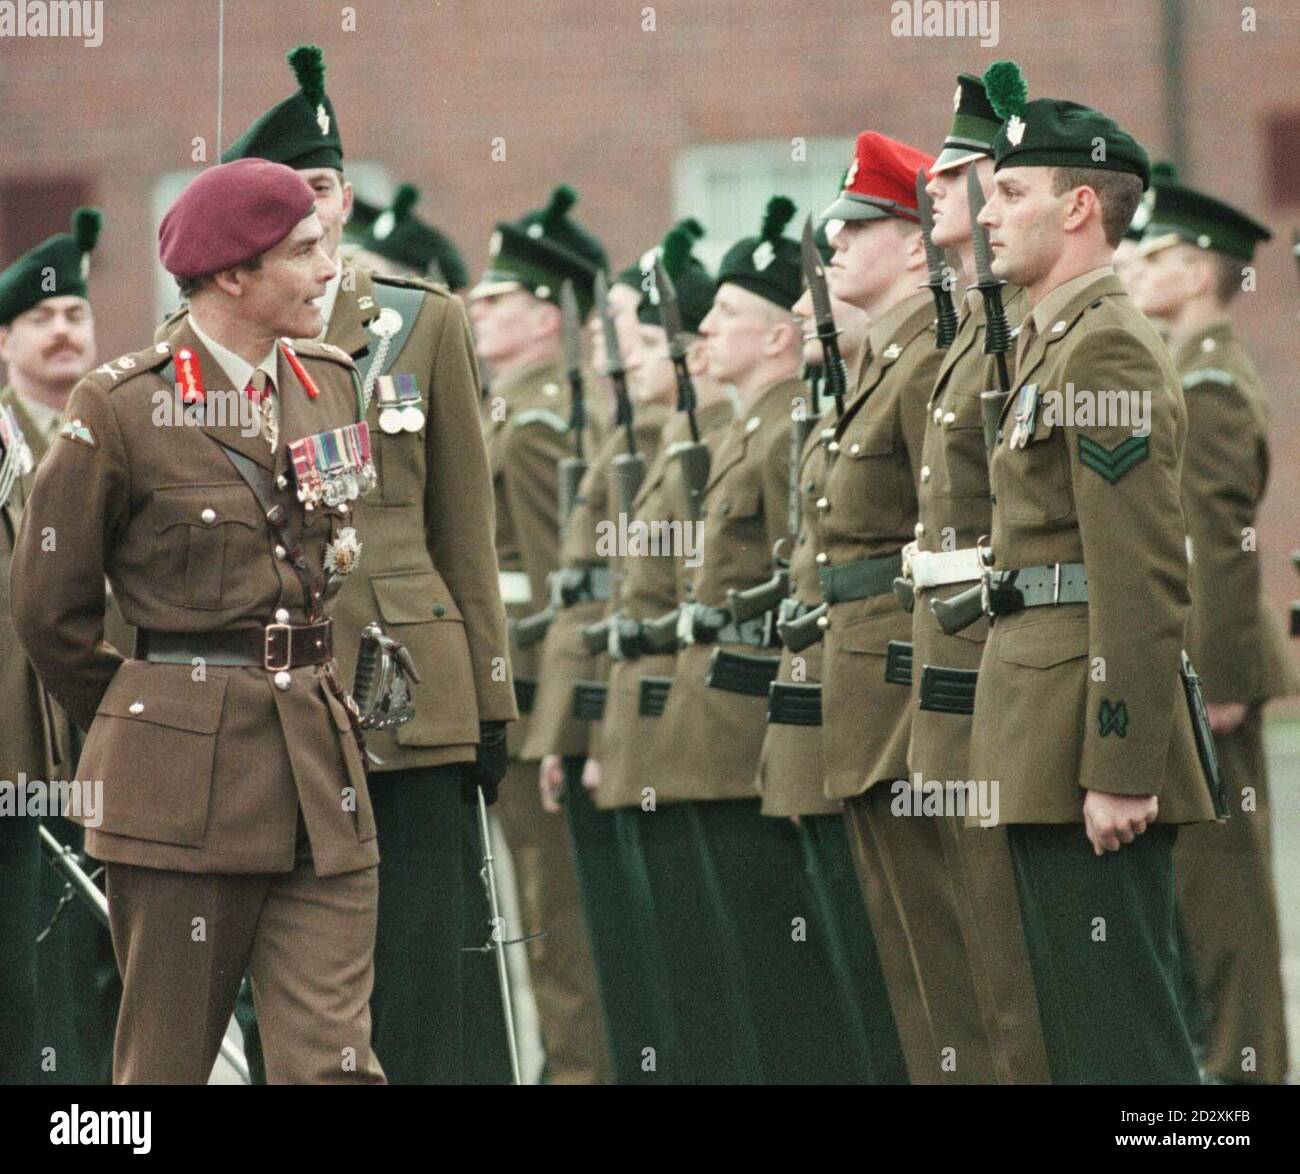 The General Officer Commanding for Northern Ireland, Lt General Sir Rupert Smith, inspects the proud recruits of the Templer Platoon at Ballymena Royal Irish Regiment Depot today (Thursday). Photo by Paul Hamilton. See PA Story ULSTER Soldiers. Stock Photo